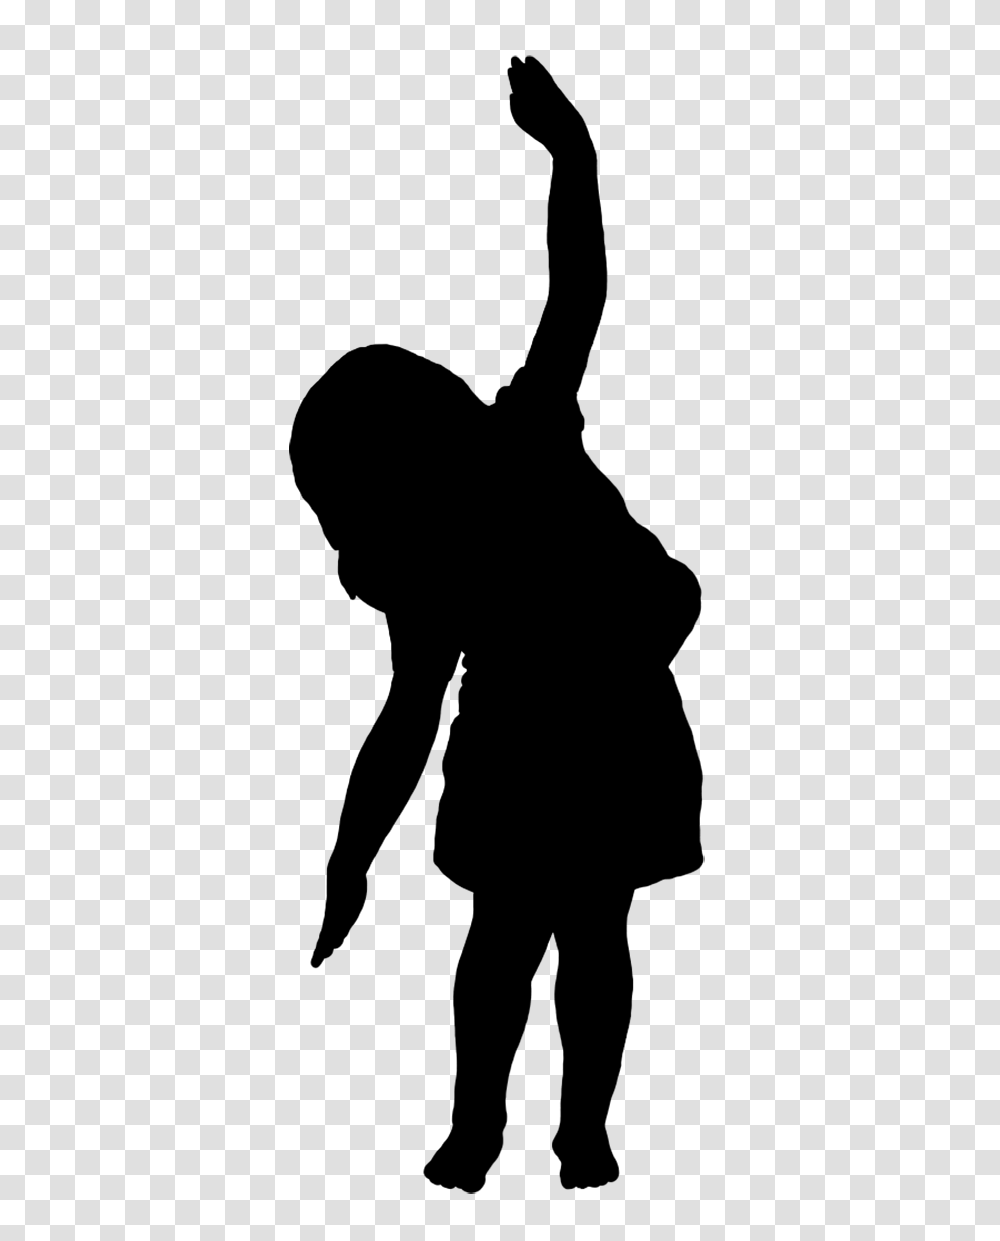 Black Silhouette Of Girl Dancing Canvas Creations, Electronics, Phone, Mobile Phone Transparent Png